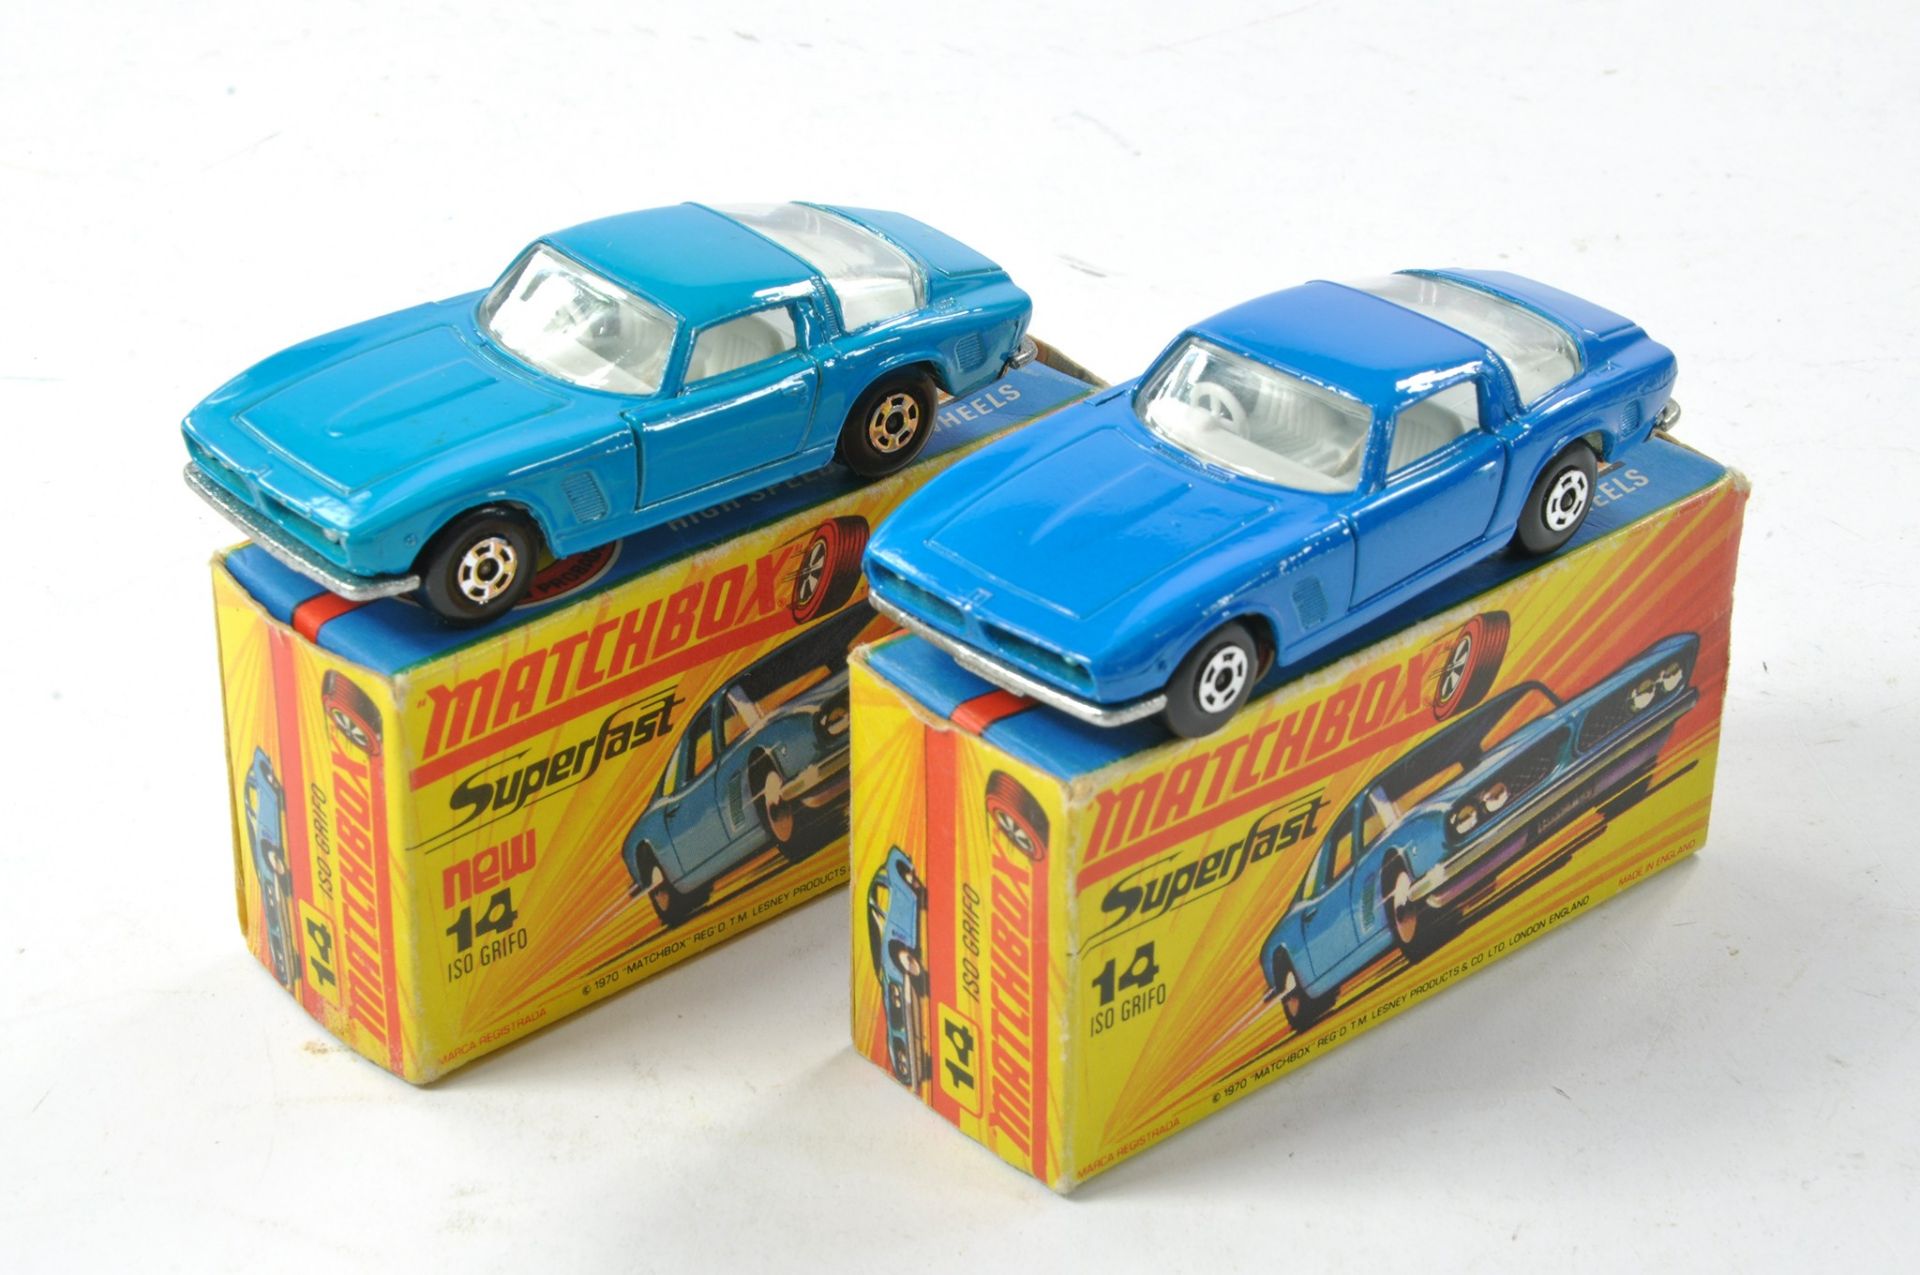 Matchbox Superfast No. No. 14a Iso Grifo x 2. Light and Darker Blue bodies, clear windows, off white